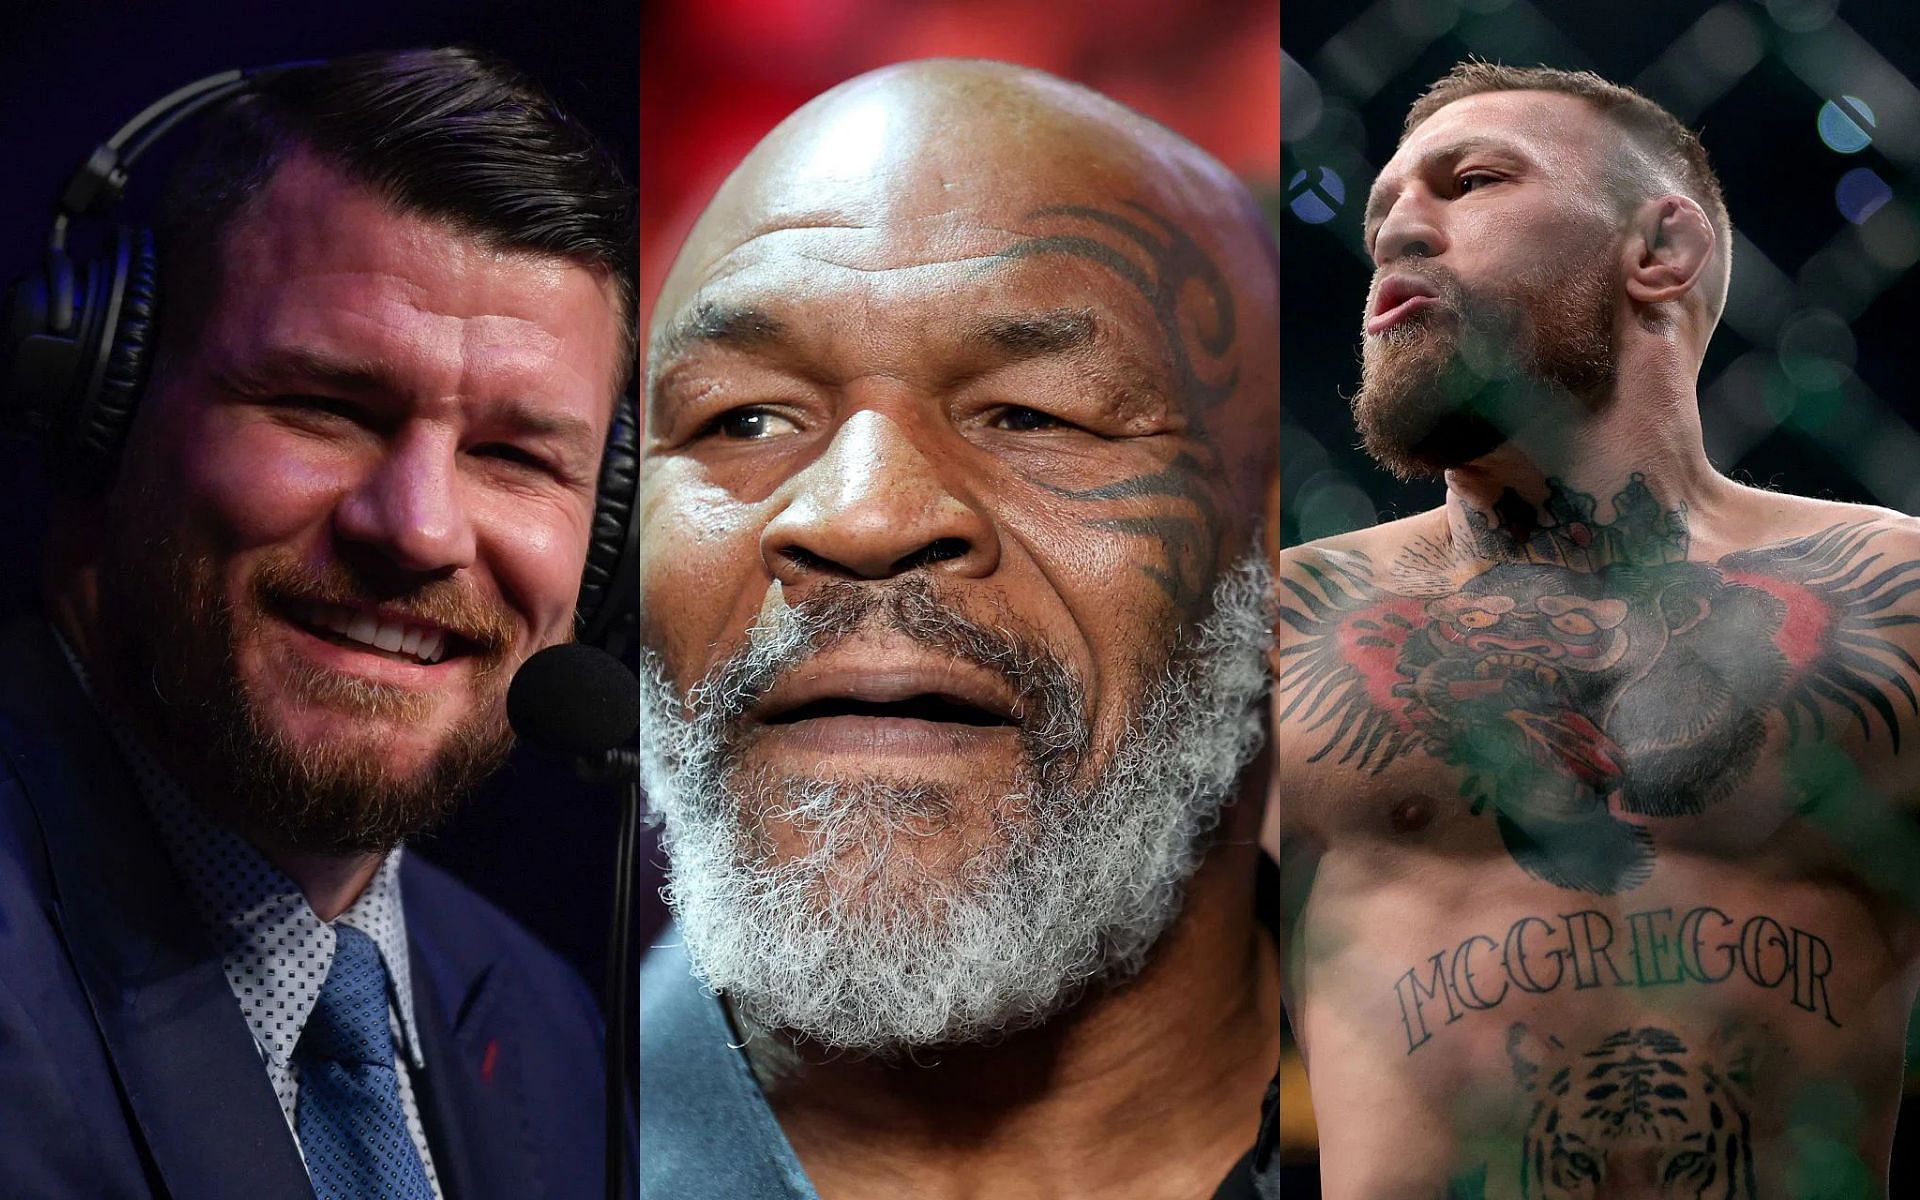 Michael Bisping (Left), Mike Tyson (Middle), and Conor McGregor (Right) (Images courtesy of Getty)